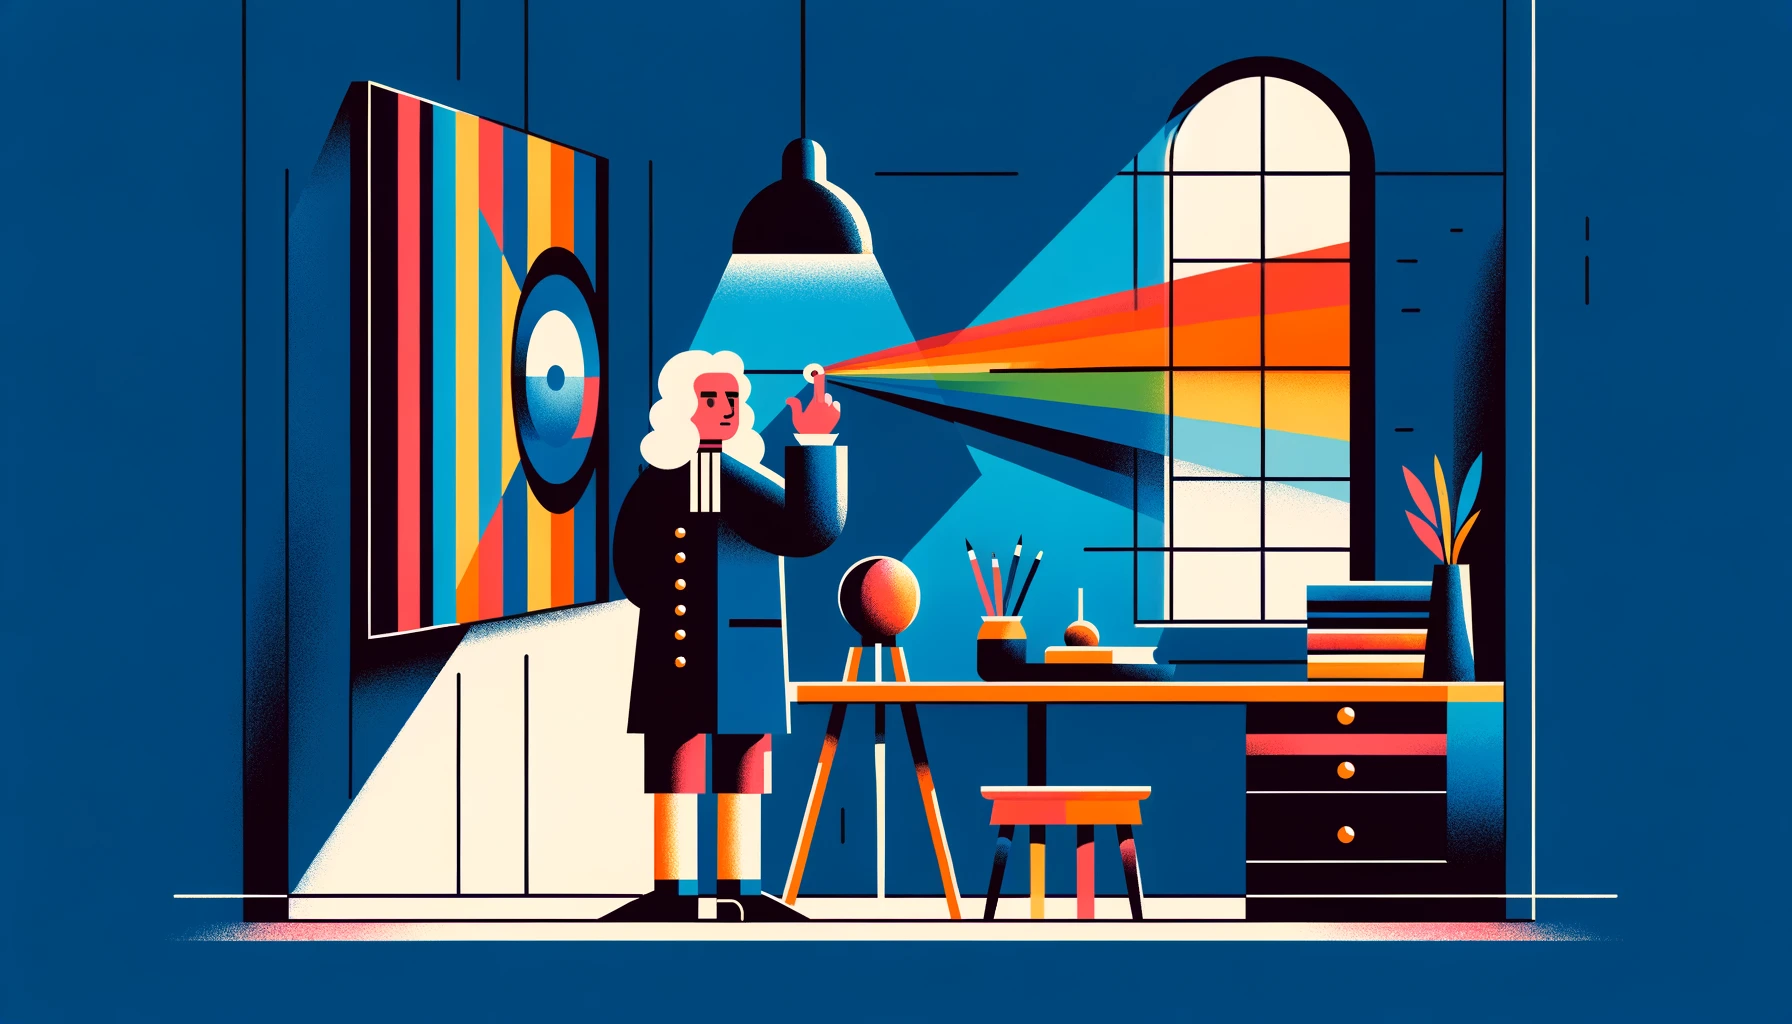 Sir Isaac Newton conducting his experiment on the refraction of light.Newton holds a prism, through which a beam of light is passing and dispersing into a spectrum of colors against the wall. This references his discovery of the visible spectrum.